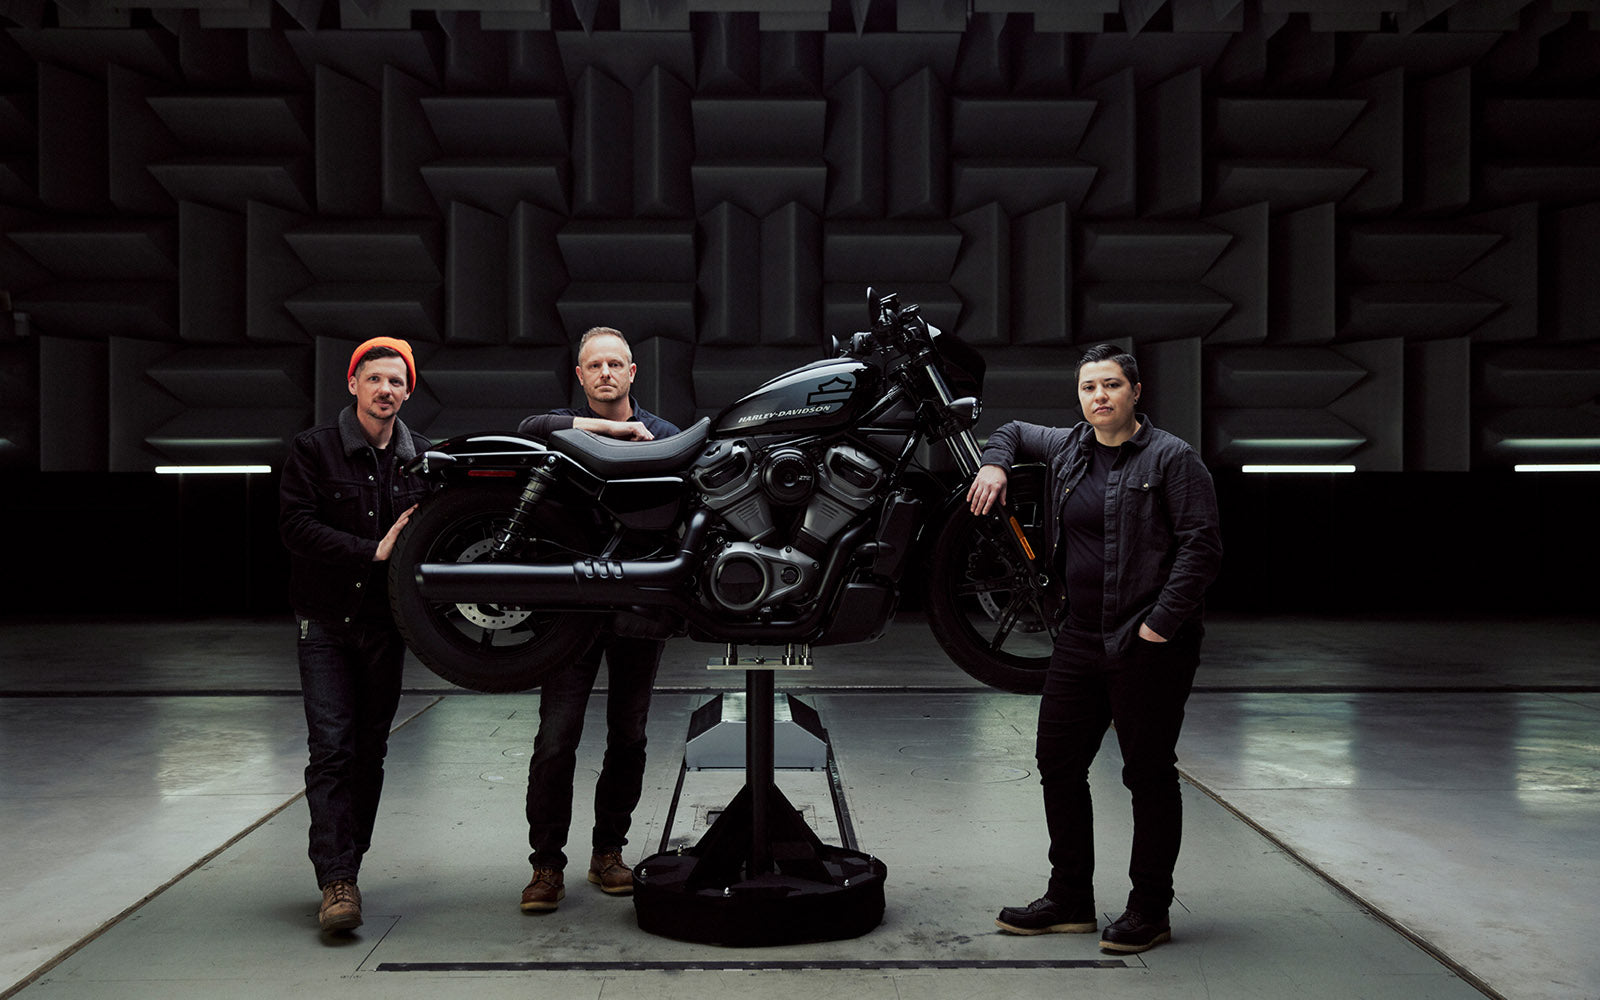 Introducing the Harley-Davidson Nightster